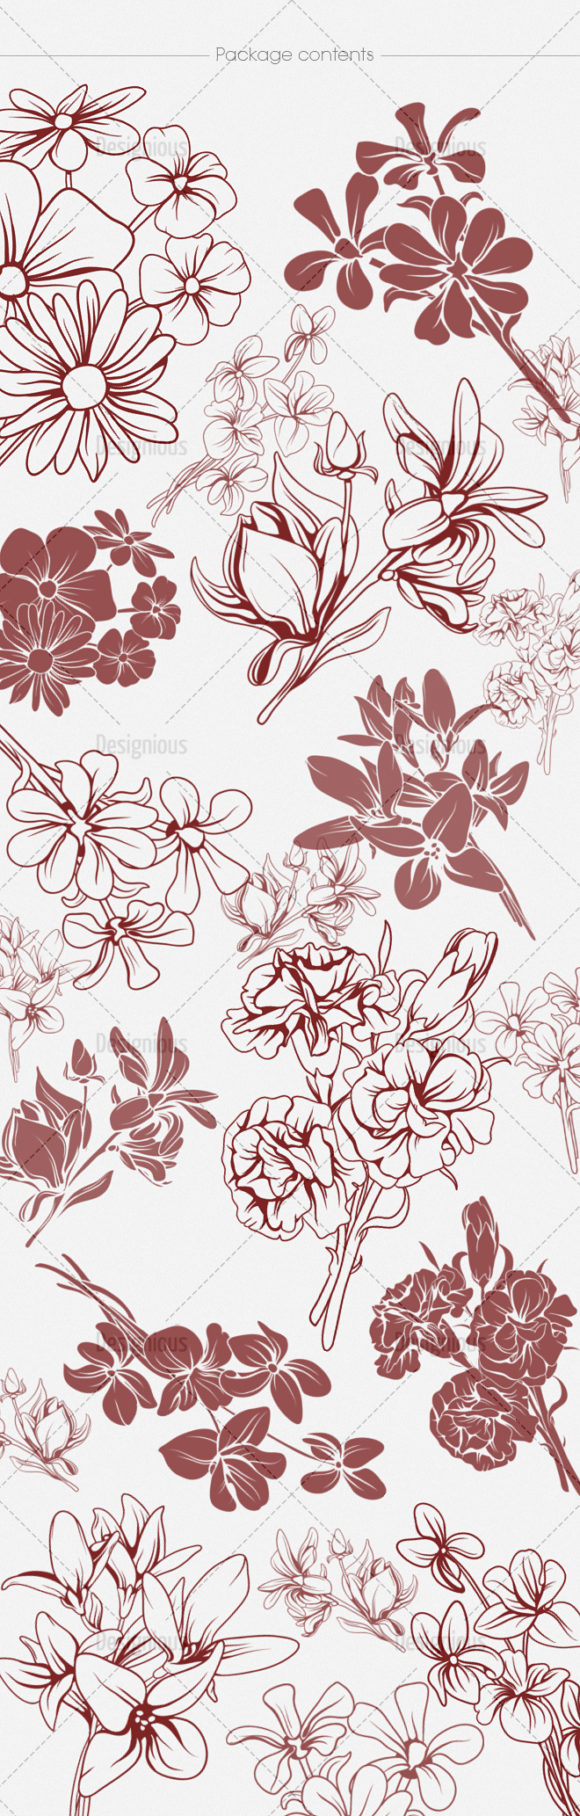 Floral Brushes Pack 48 2